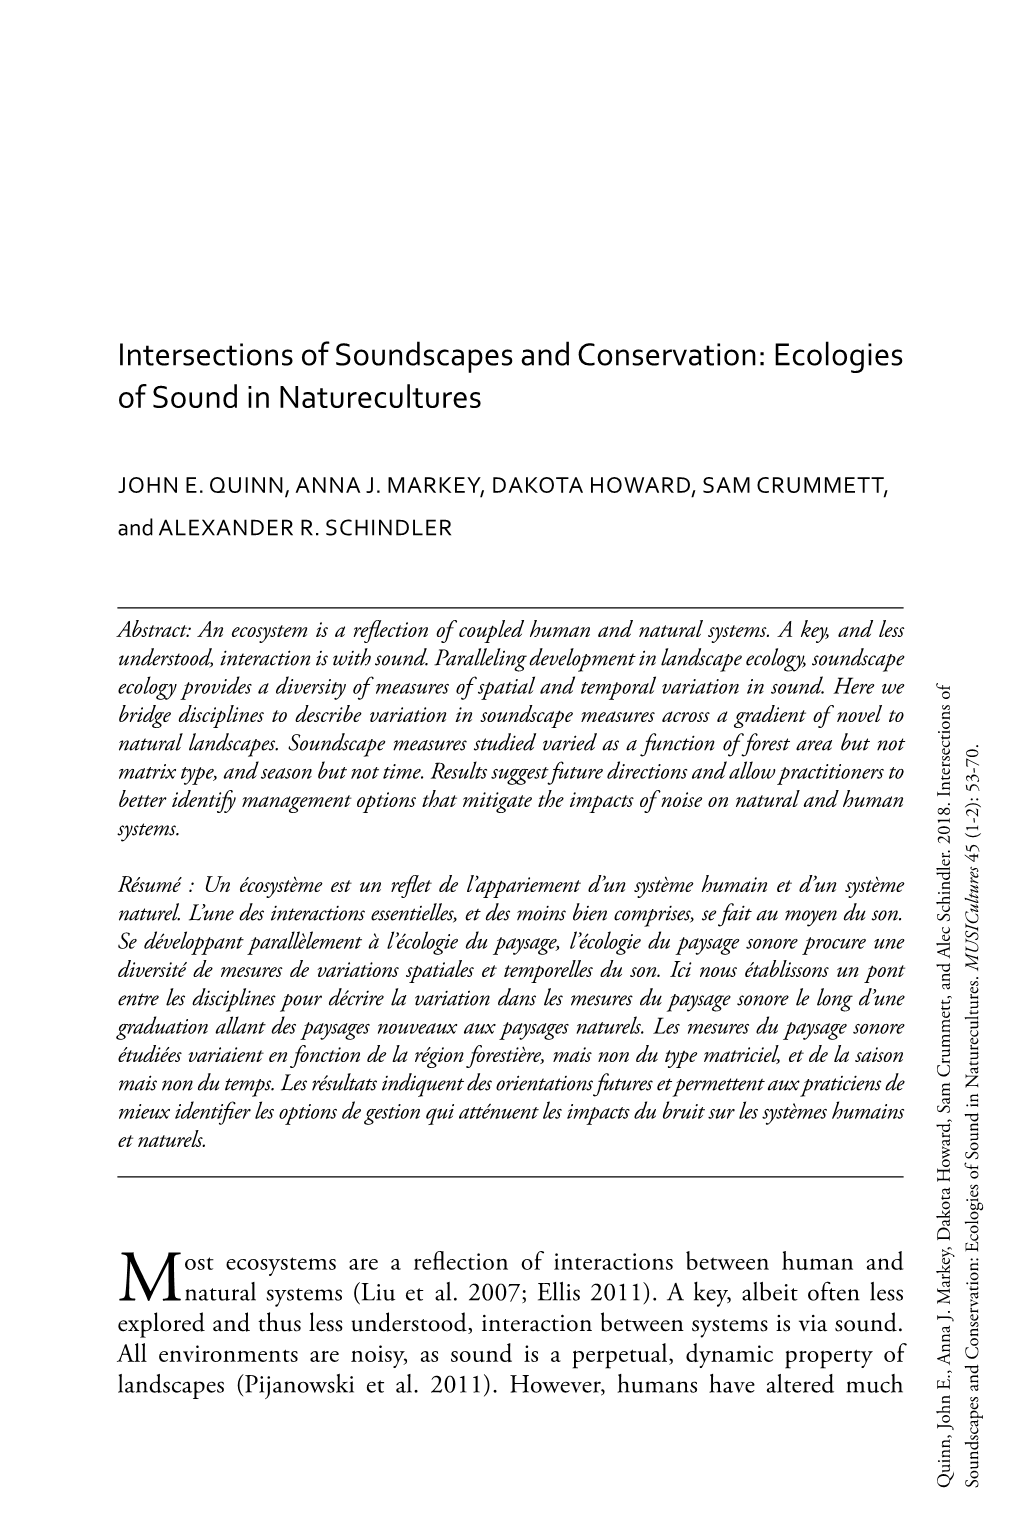 Intersections of Soundscapes and Conservation: Ecologies of Sound in Naturecultures